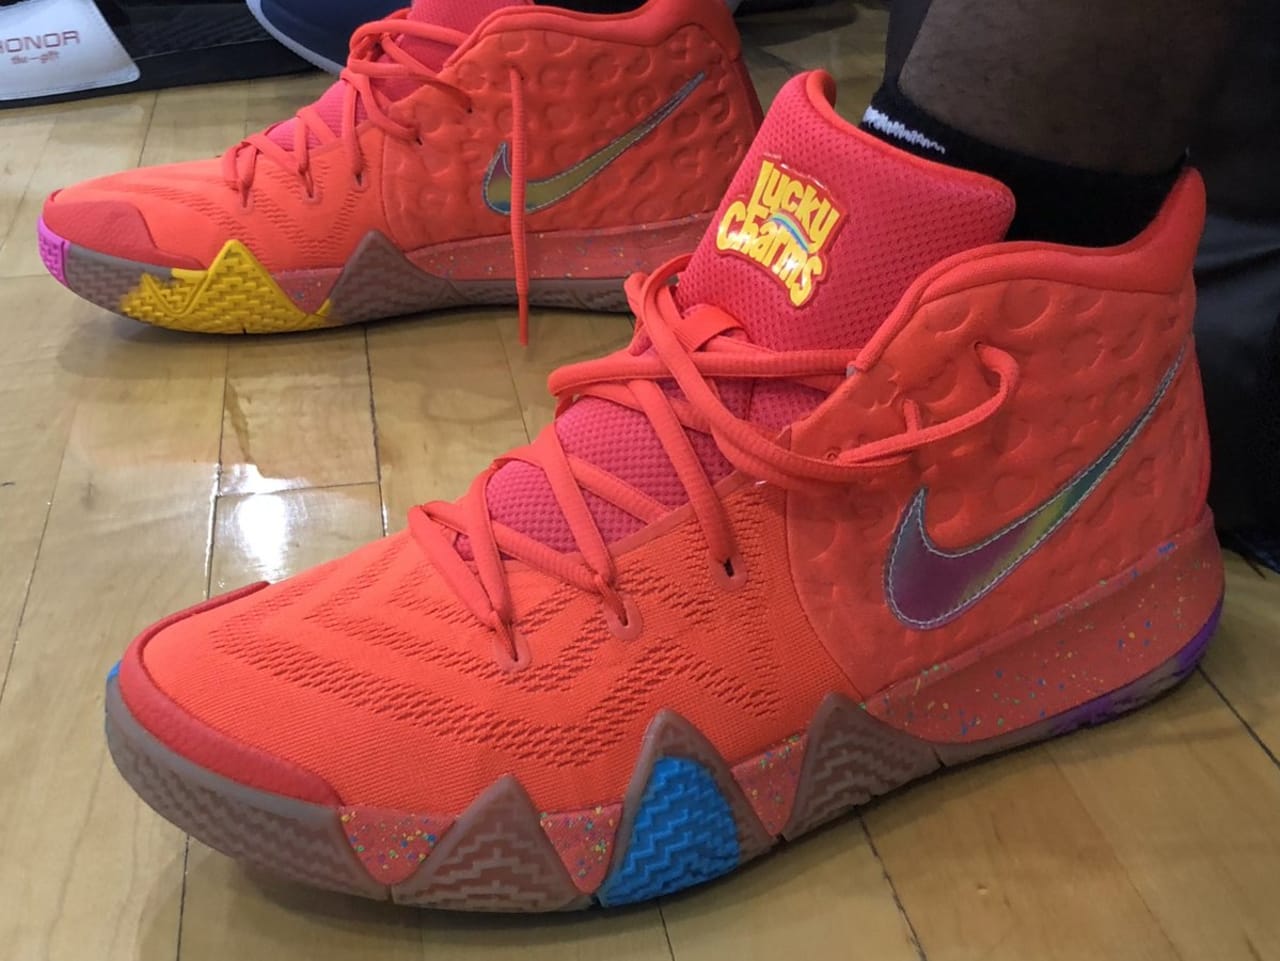 kyrie lucky charm shoes